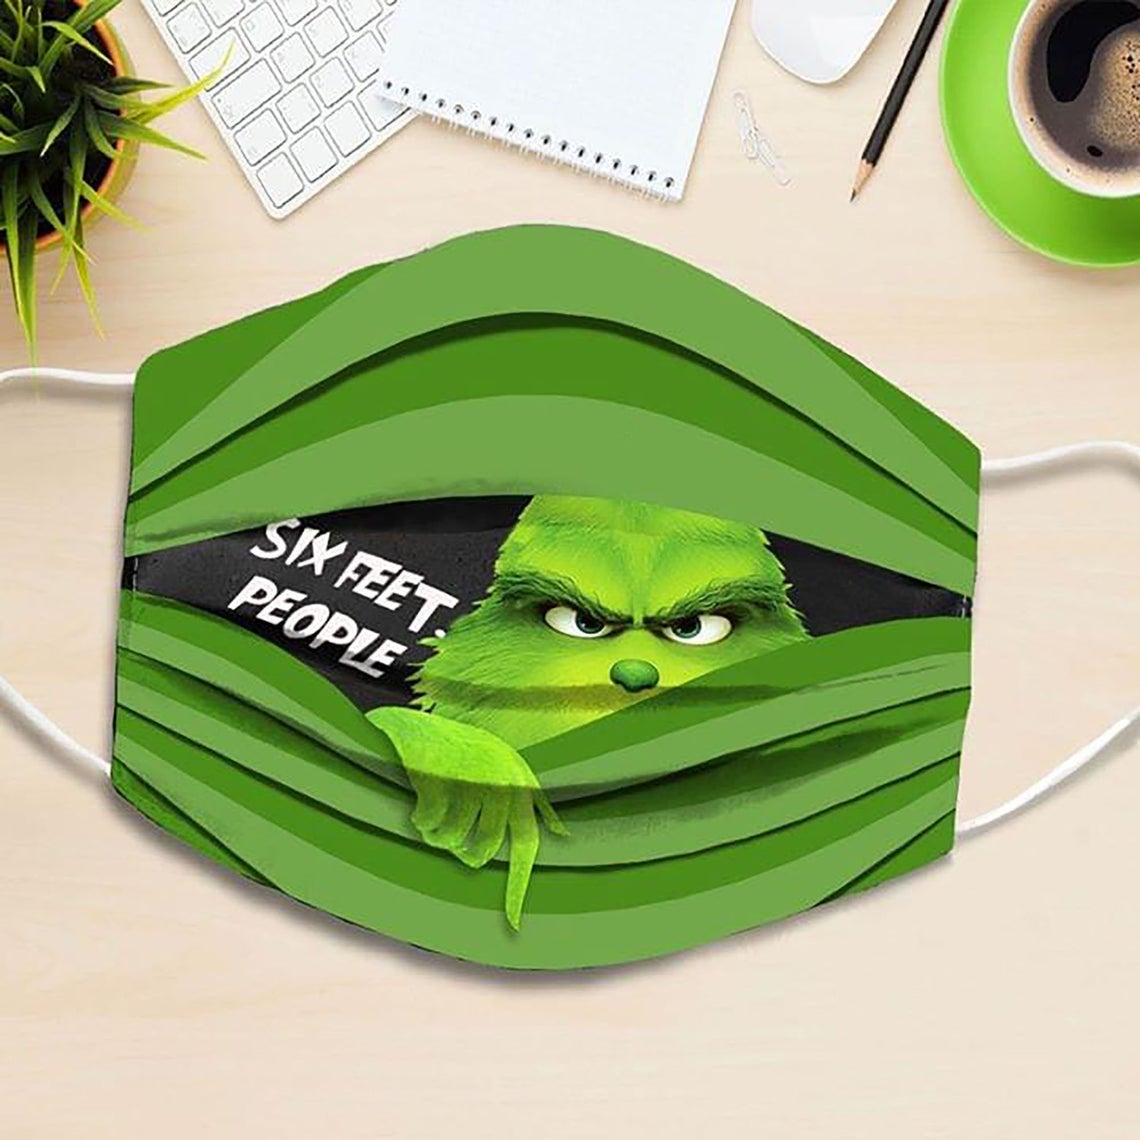 The grinch six feet people full printing face mask 1